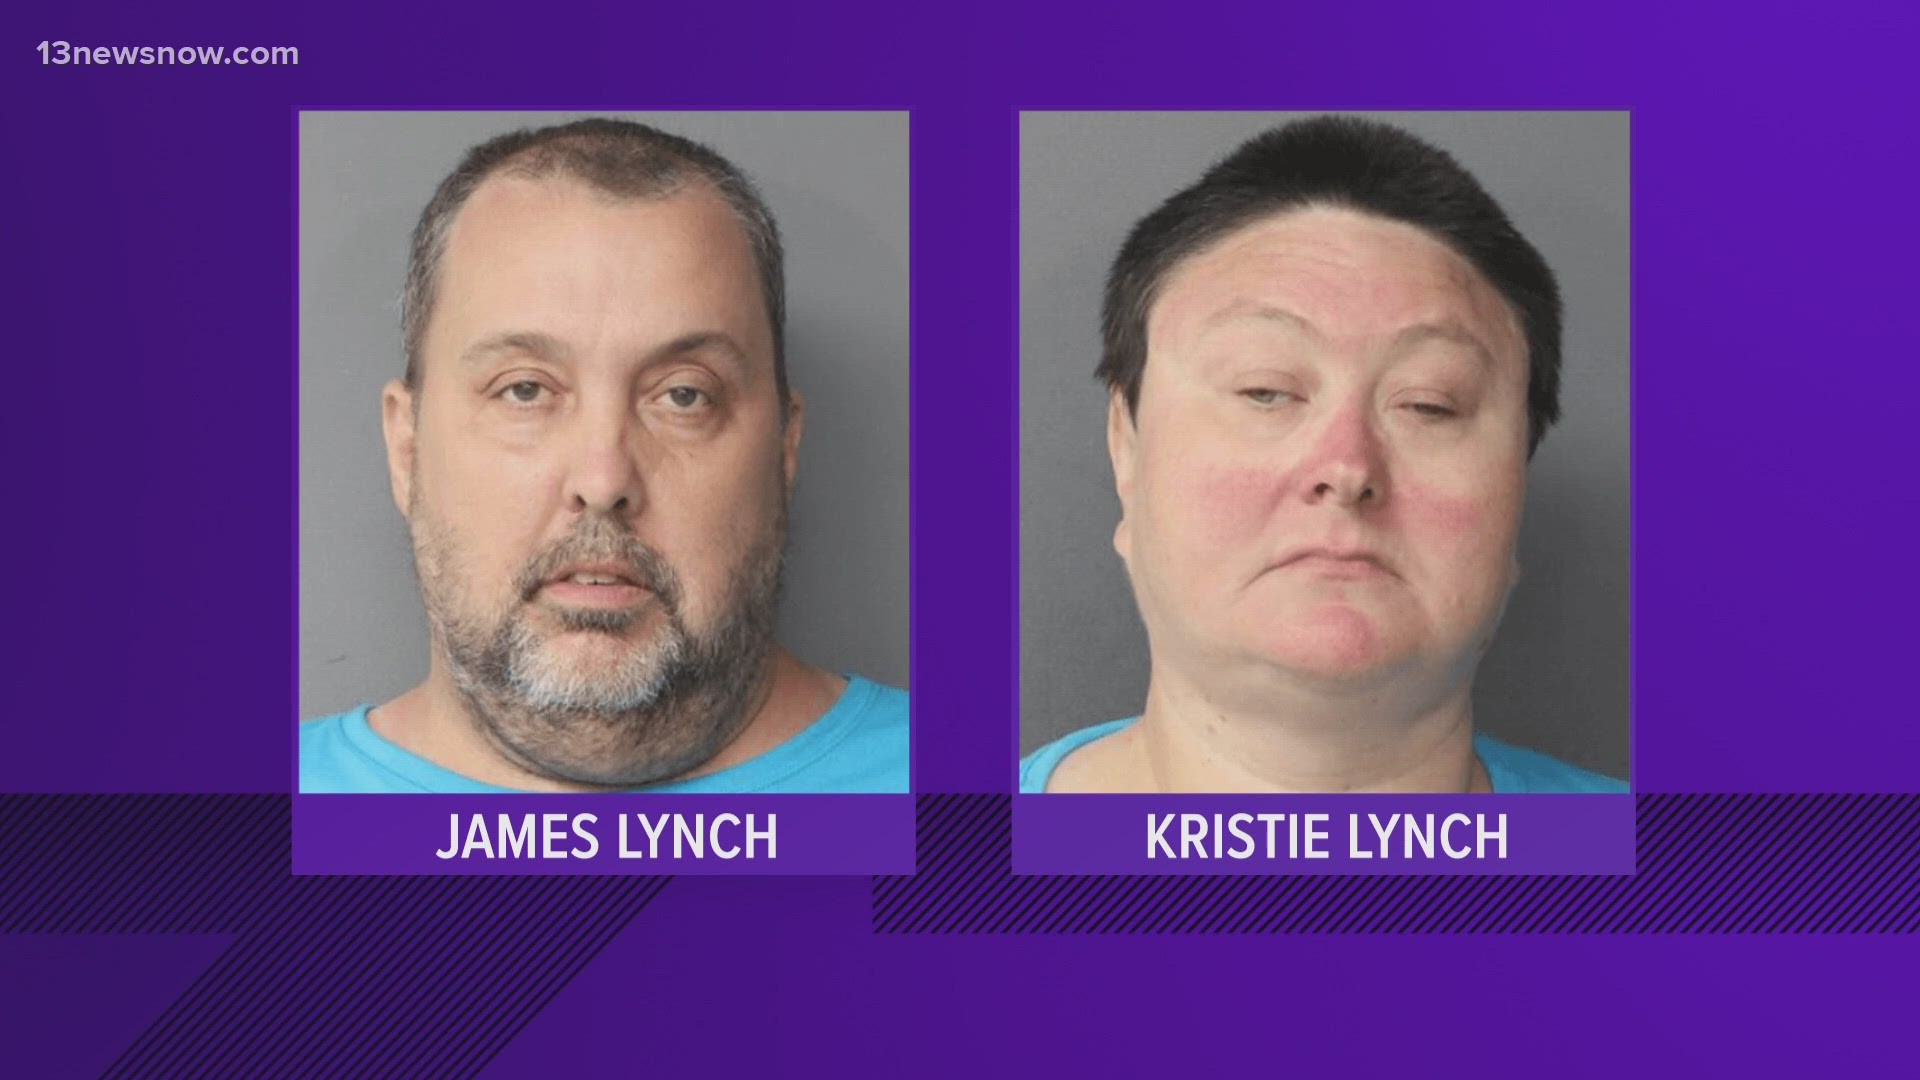 A husband and wife are facing second-degree murder charges. Norfolk police say the couple admitted to beating a man to death Friday night.